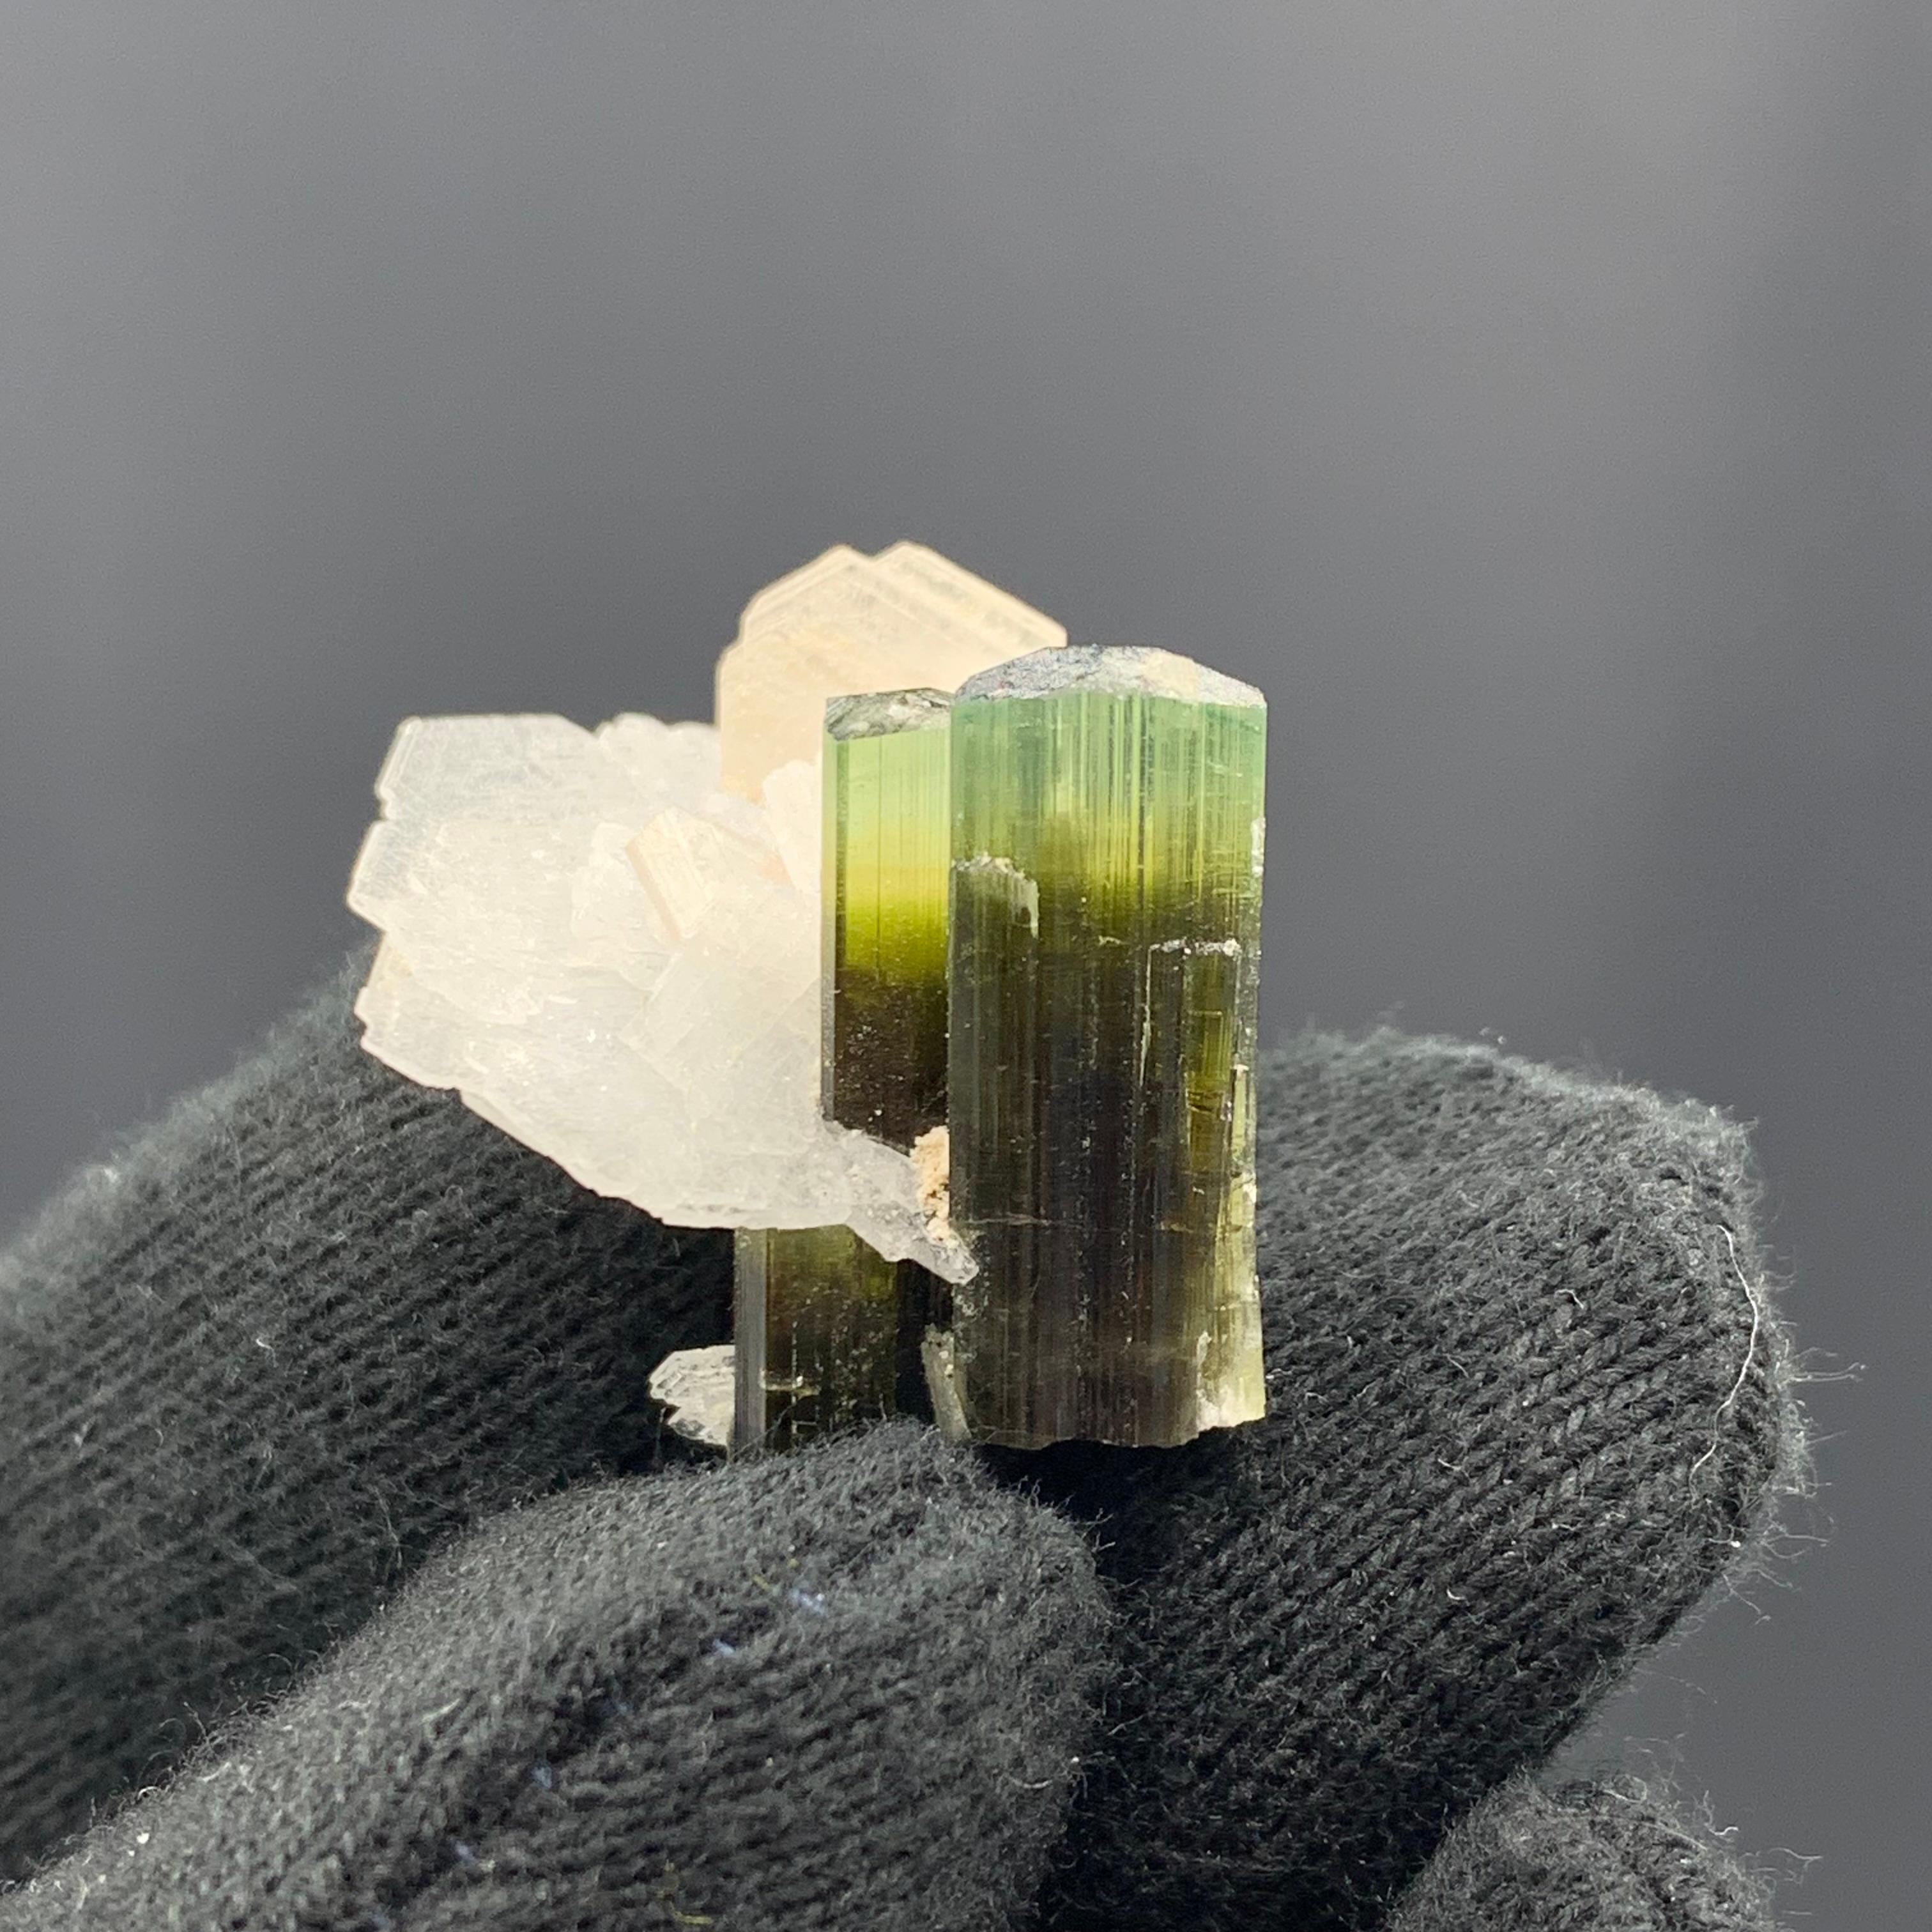 5.61 Gram Dual Tourmaline Crystal With Albite From Stak Nala, Skardu, Pakistan 

Weight: 5.61 Gram 
Dimension: 2.3 x 2.4 x 2.5 Cm 
Origin: Stak Nala, Skardu District, Pakistan 

Tourmaline is a crystalline silicate mineral group in which boron is